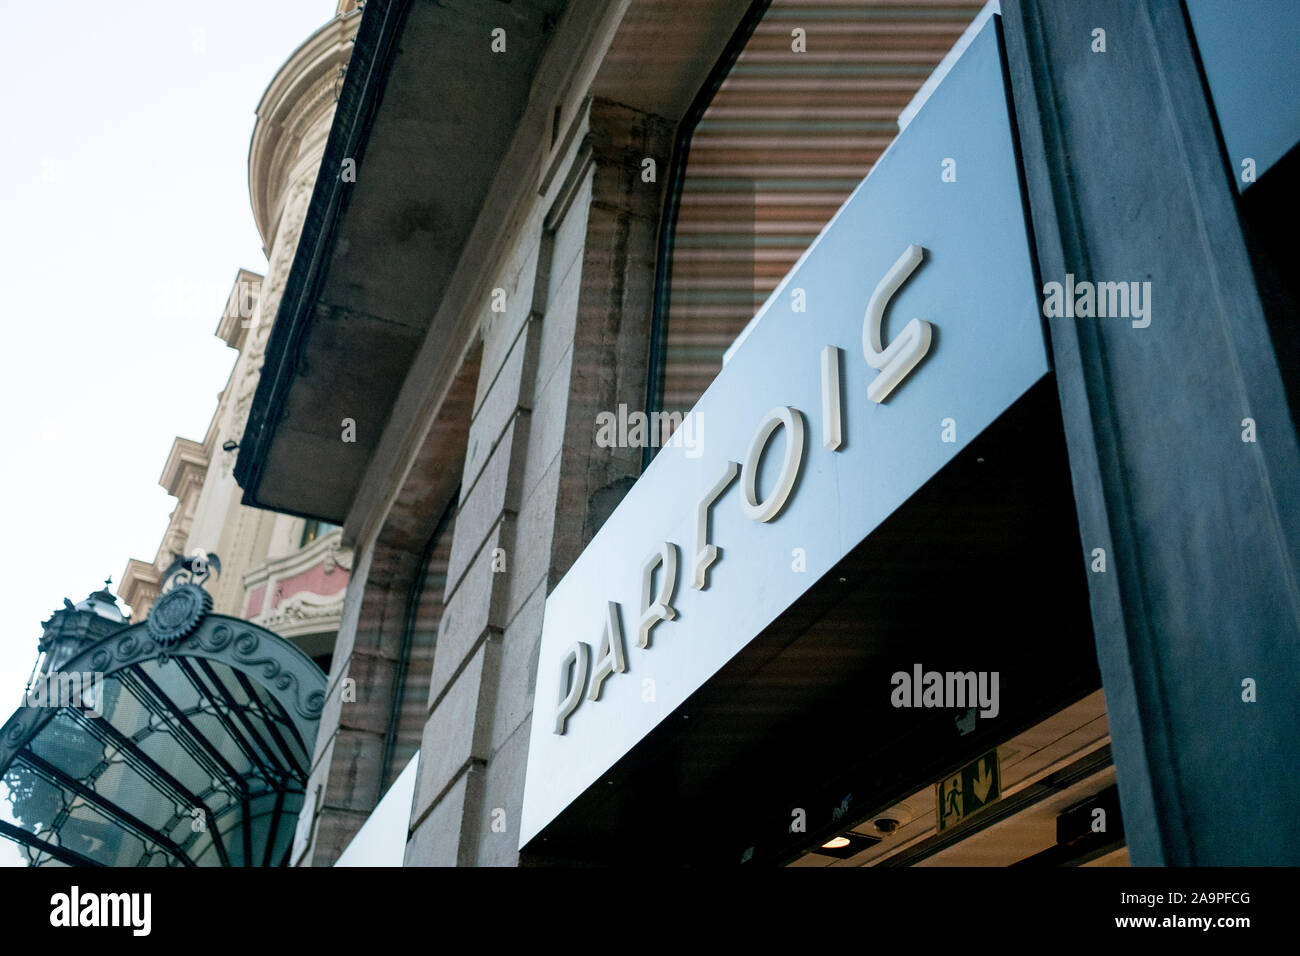 Storefront Barcelona High Resolution Stock Photography and Images - Alamy